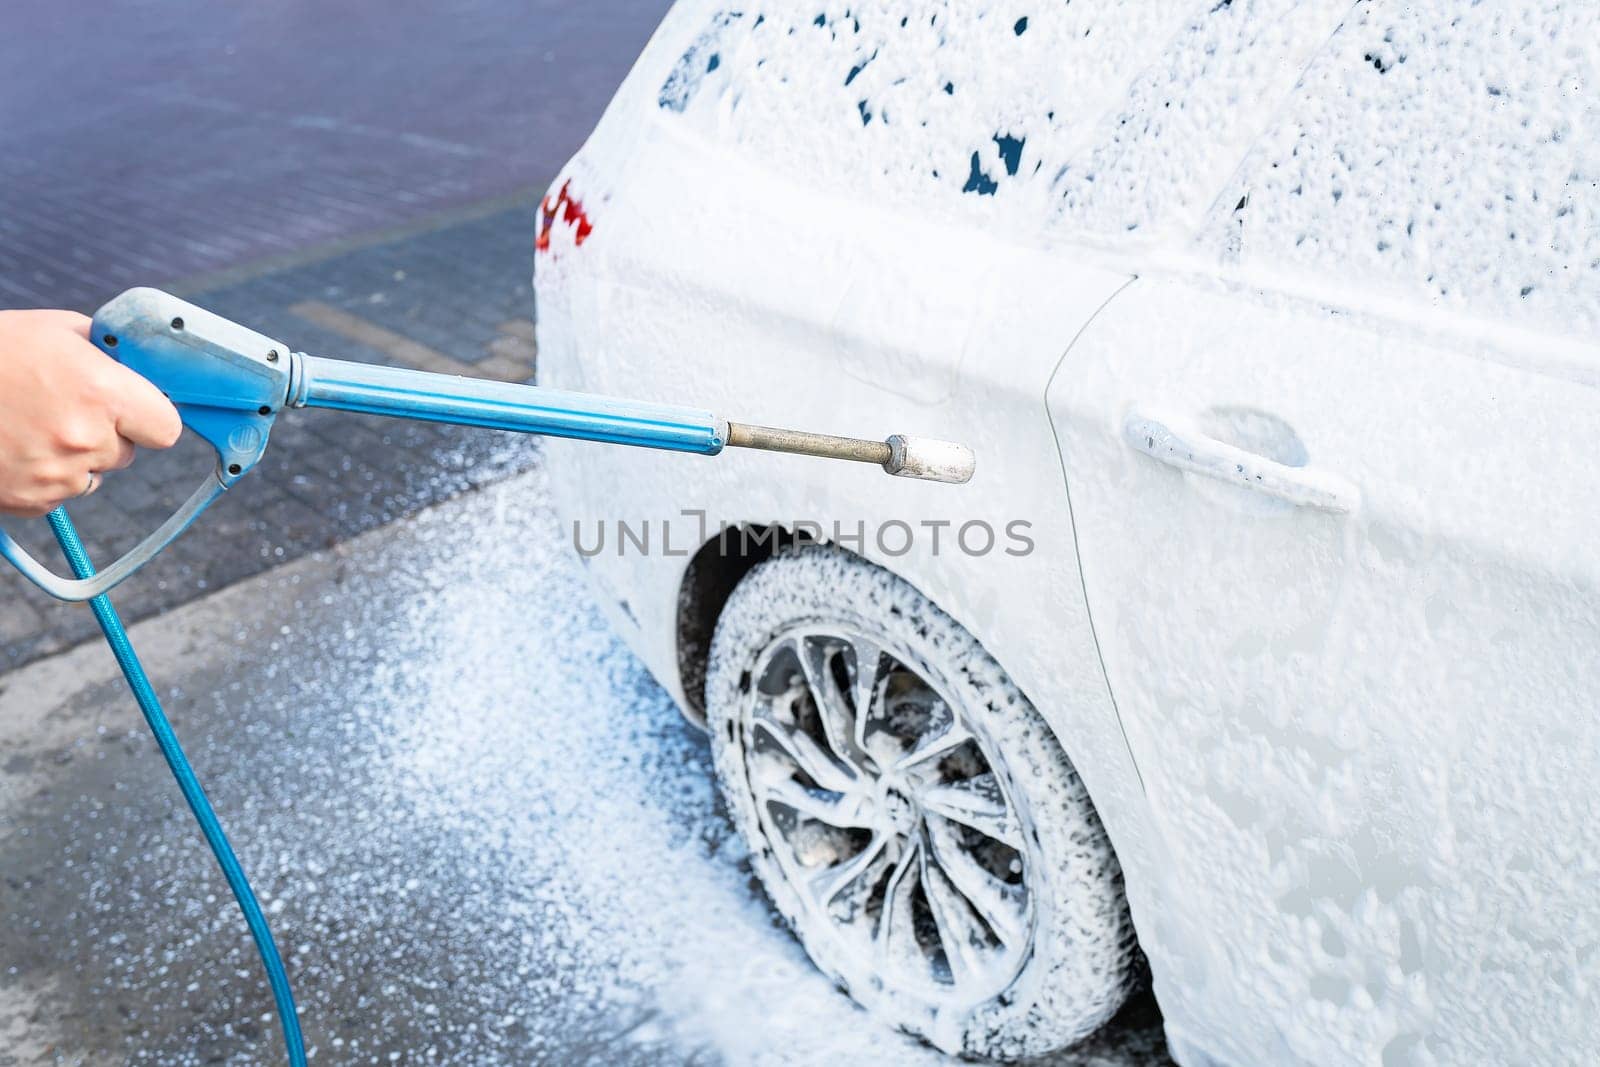 Hand washing with high pressure water in a car wash outside. A jet of foam. The concept of hand washing, self-service